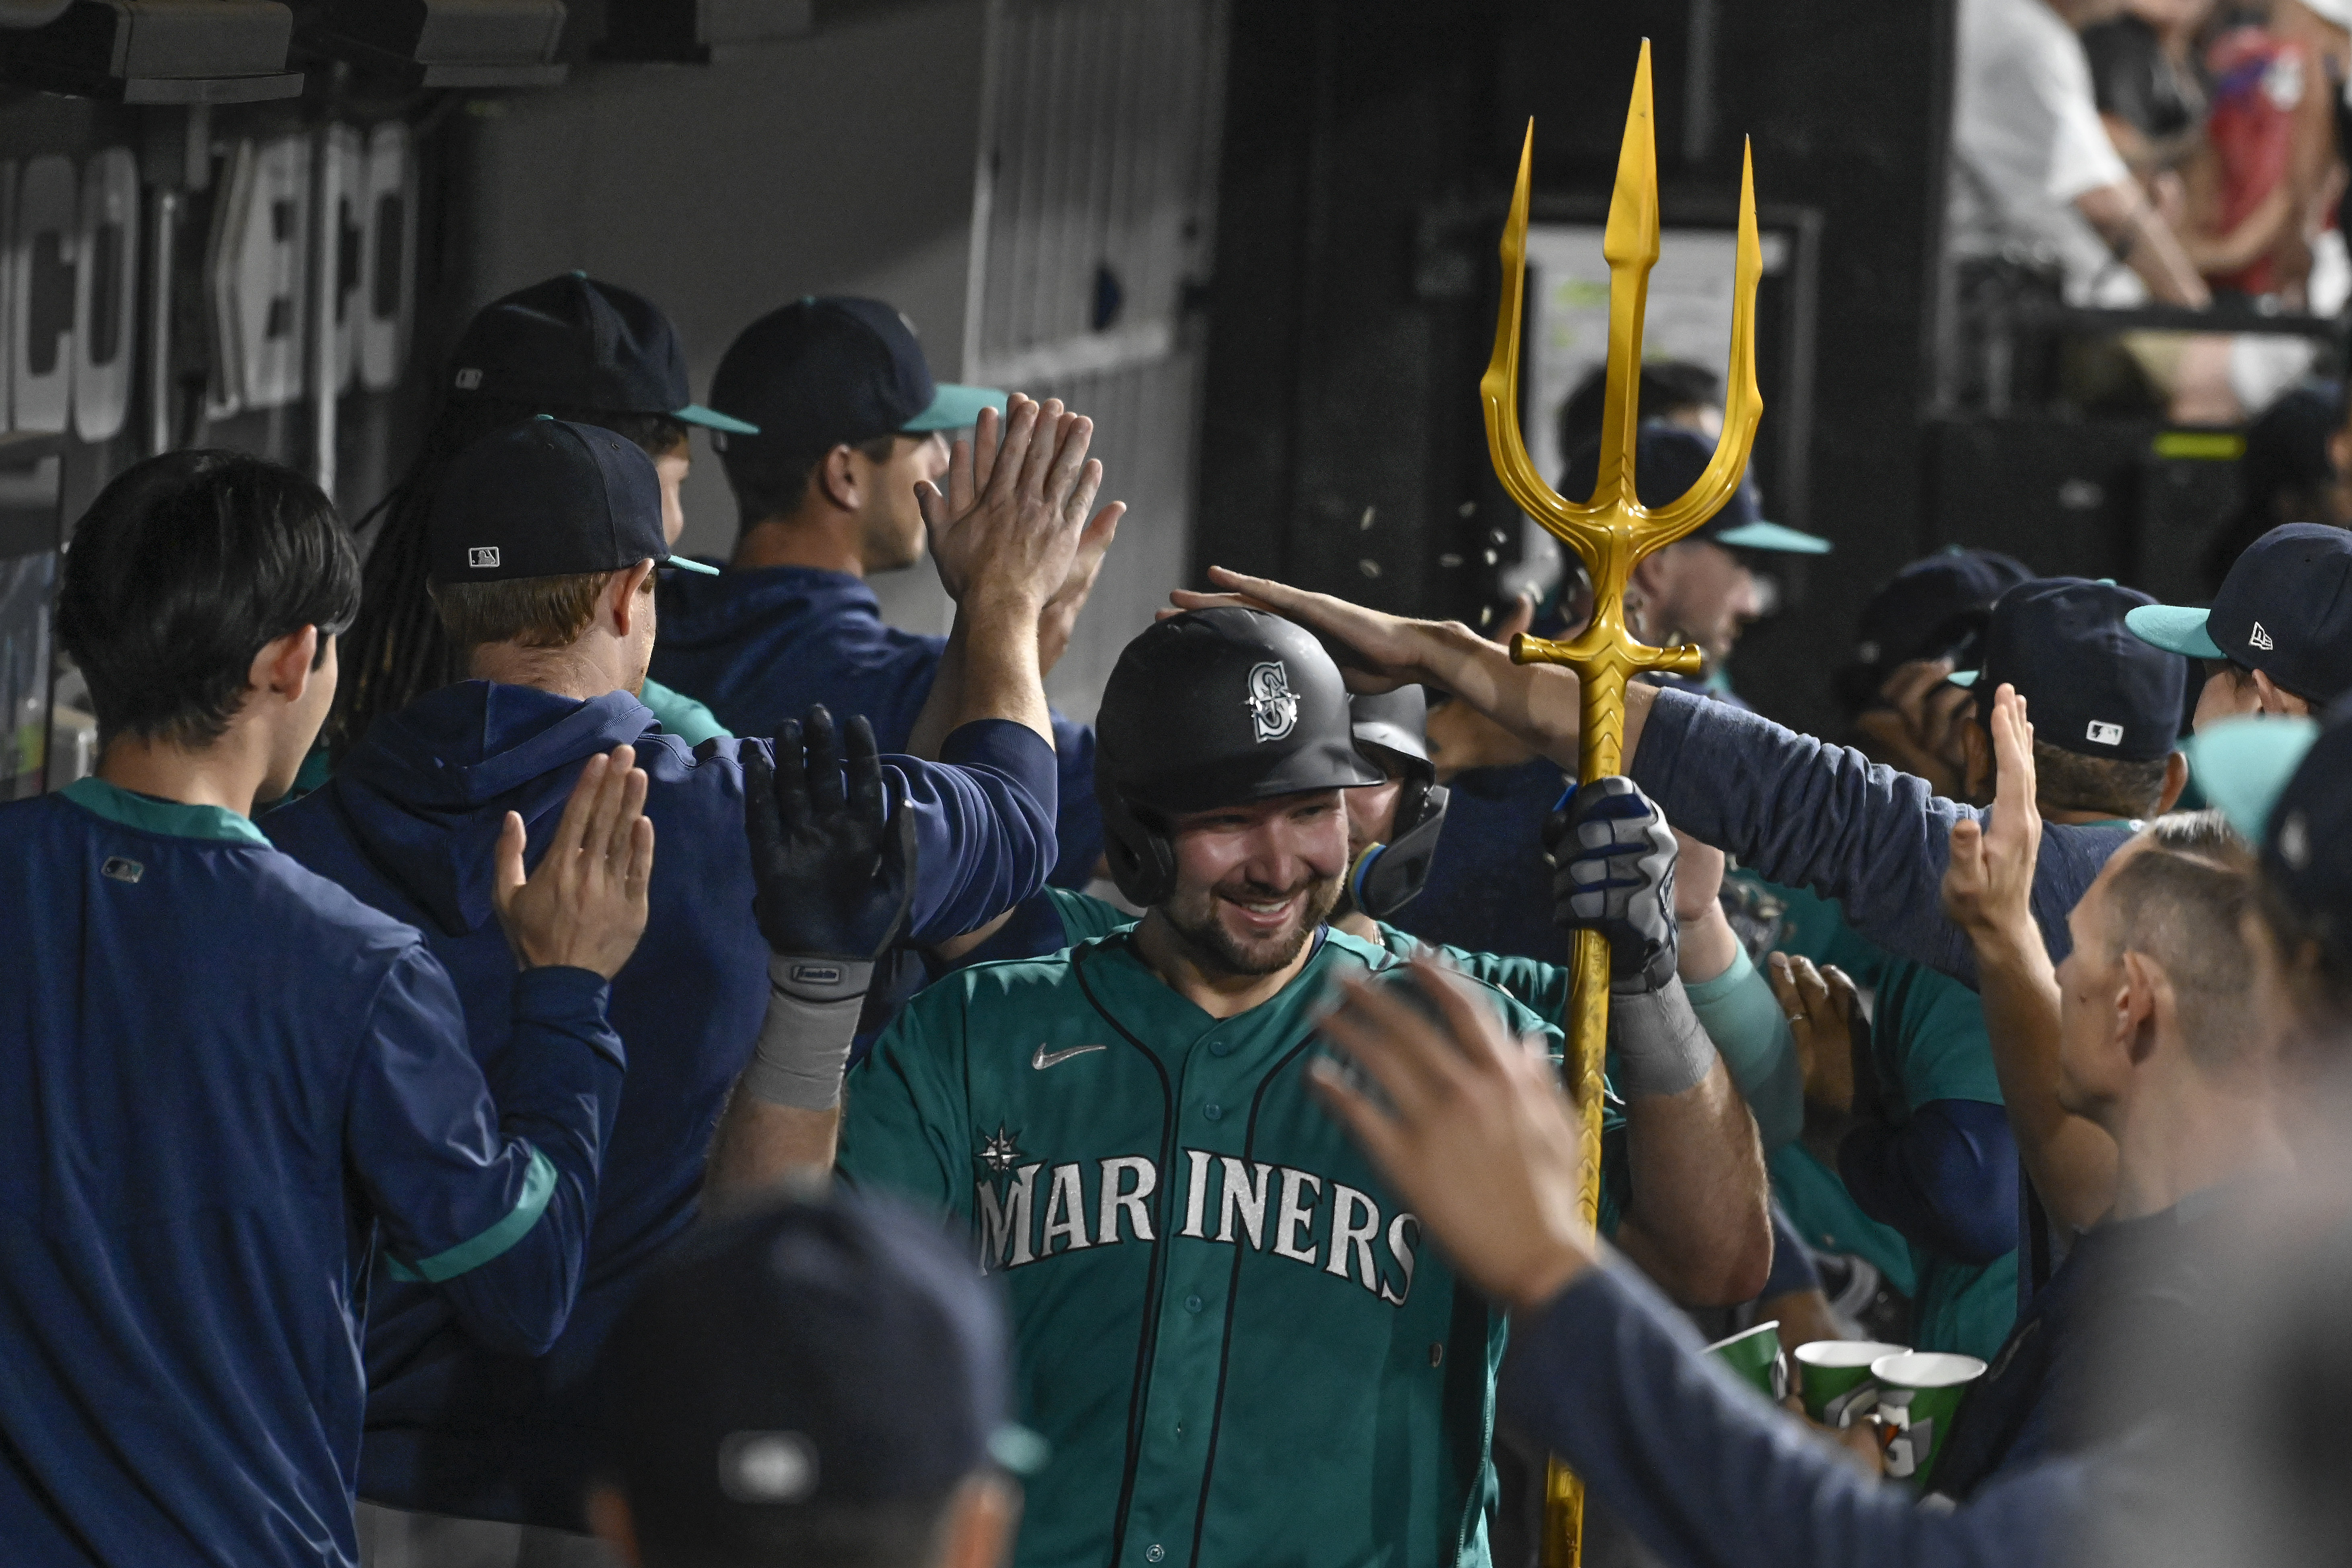 Cal Raleigh stars as Seattle Mariners pound Chicago White Sox 14-2 for 7th  straight win - The San Diego Union-Tribune